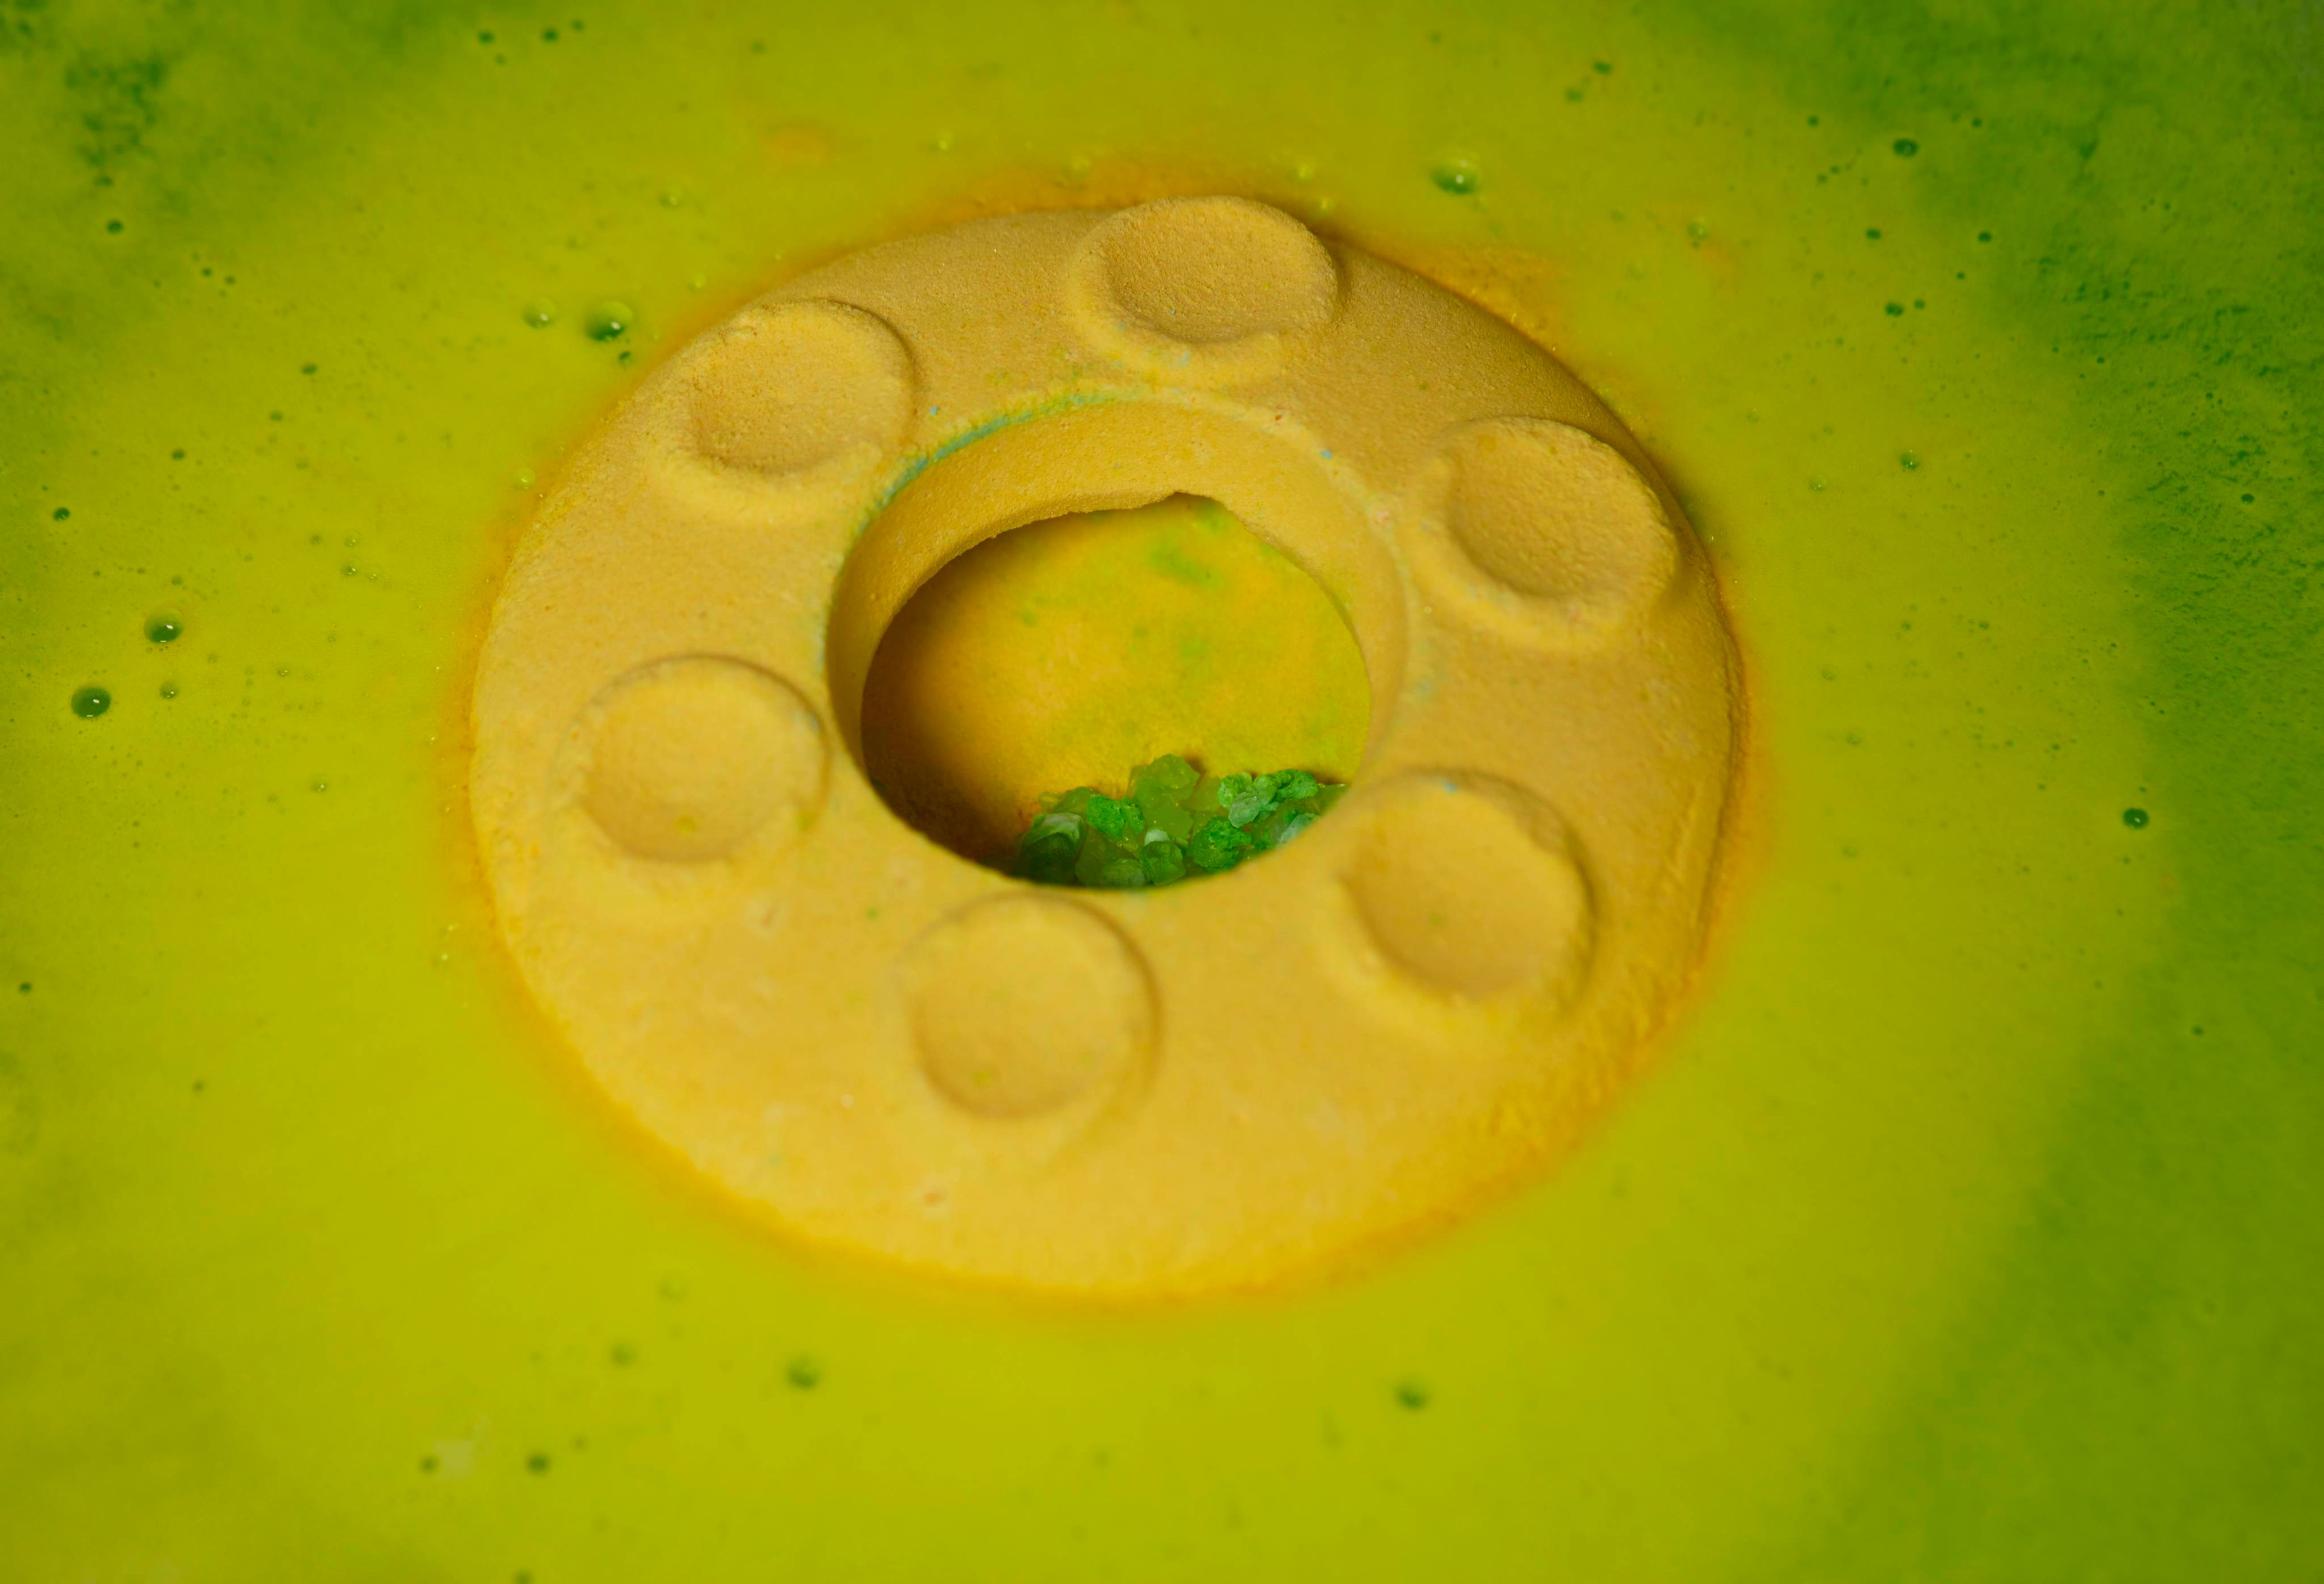 The yellow bath bomb mixes with the blue top on a silky sea of green foam and shows the green salt crystals inside.